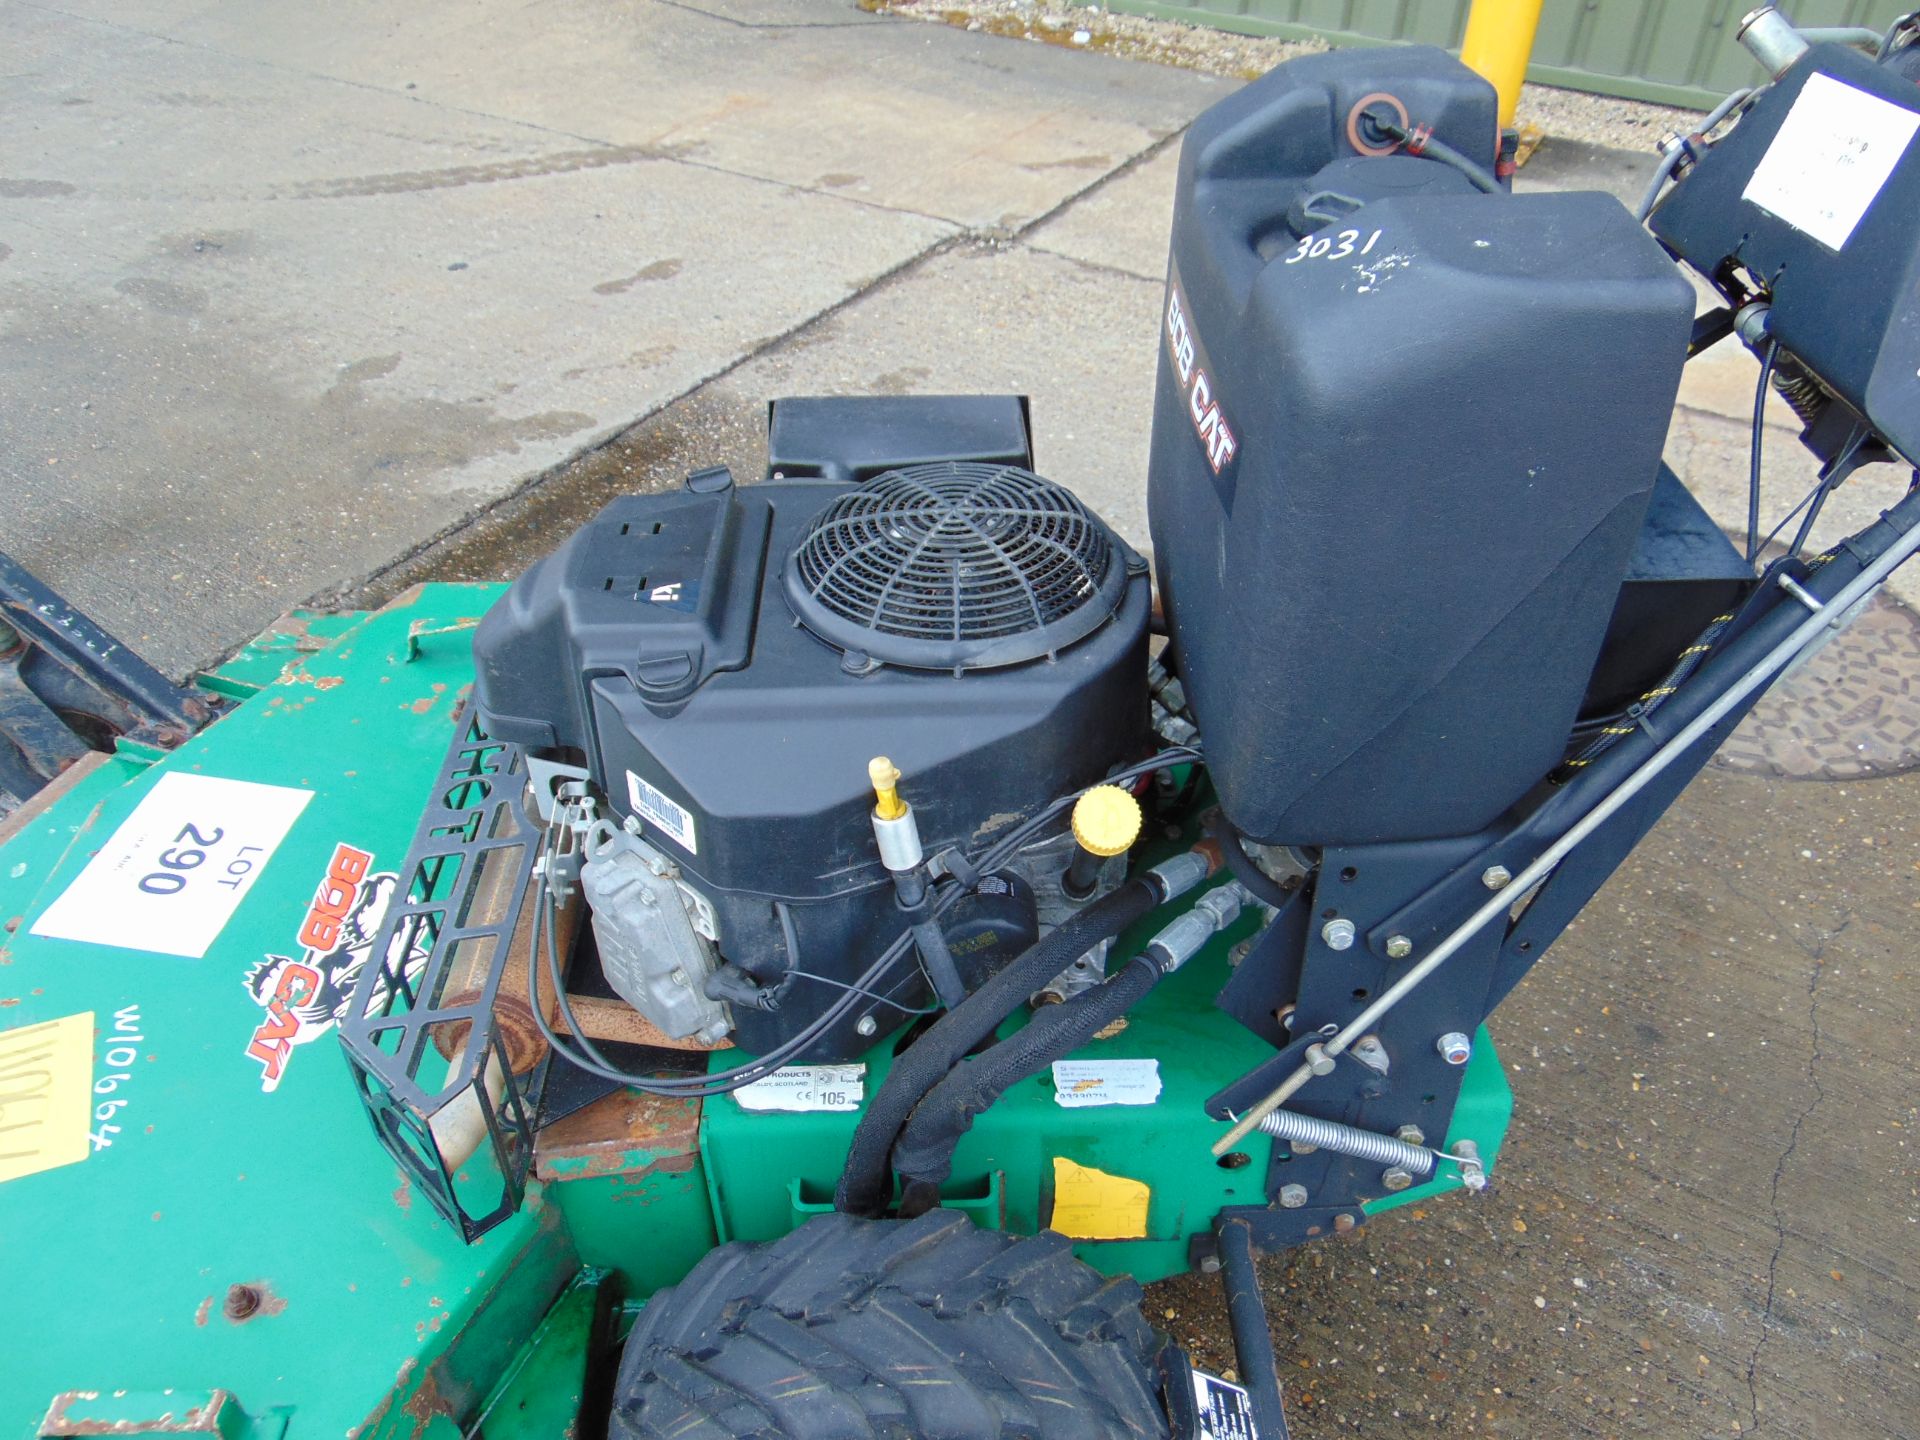 2015 Ransomes BOBCAT 52" Zero Turn Lawn Mower - only 1290 hours!! - Image 5 of 10